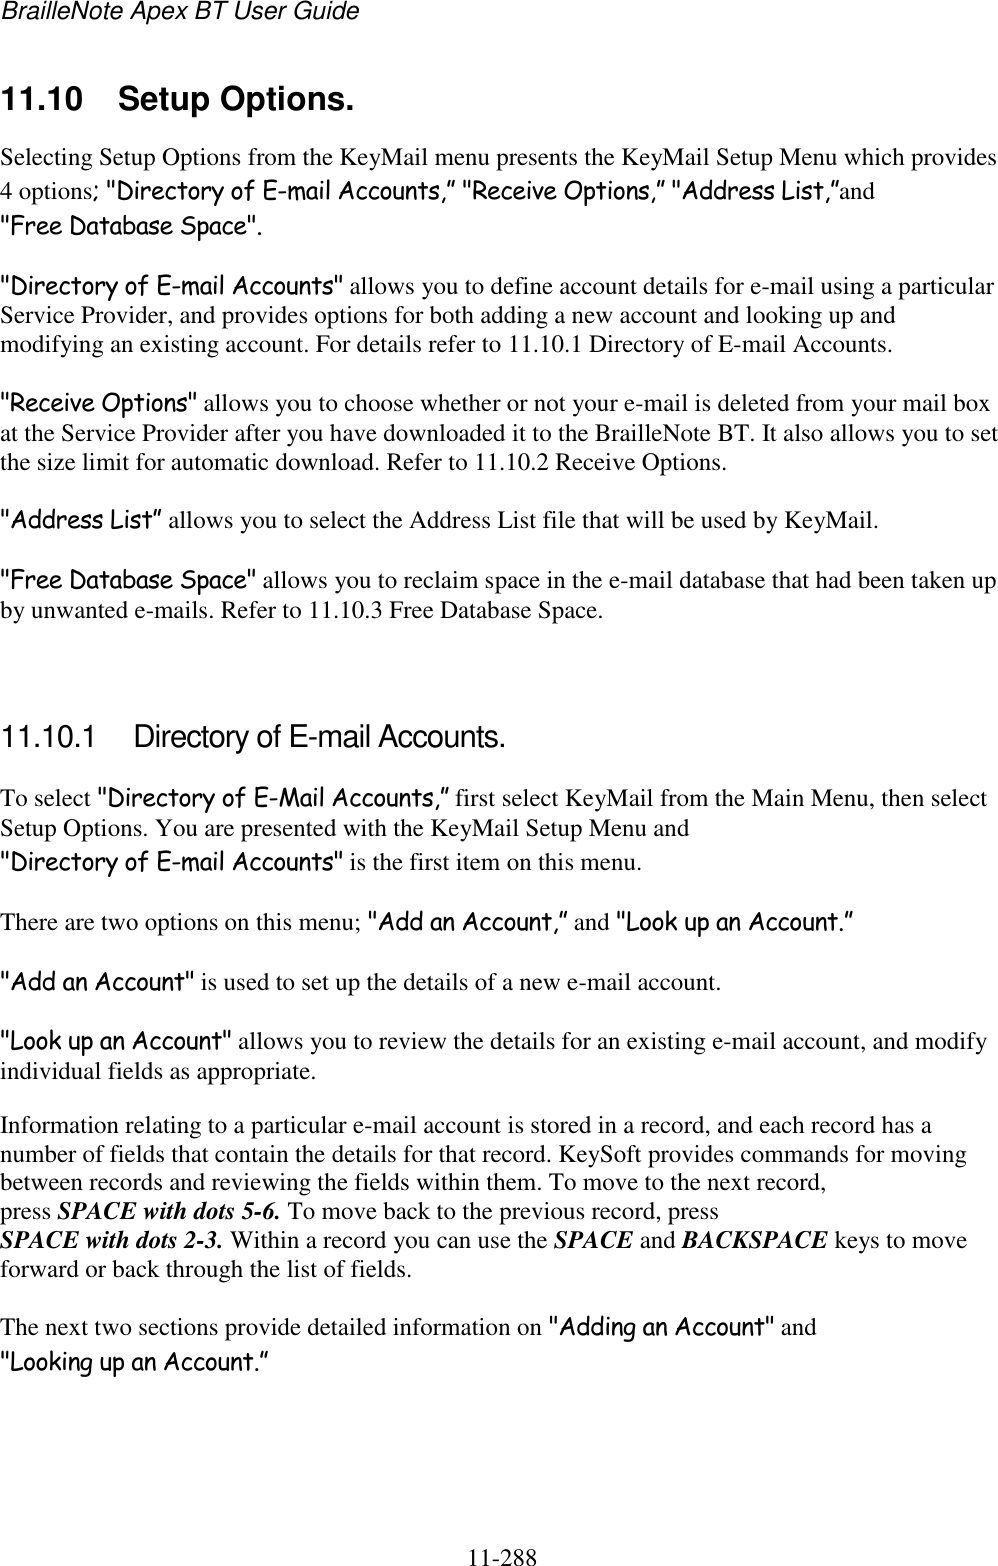 BrailleNote Apex BT User Guide   11-288   11.10  Setup Options. Selecting Setup Options from the KeyMail menu presents the KeyMail Setup Menu which provides 4 options; &quot;Directory of E-mail Accounts,” &quot;Receive Options,” &quot;Address List,”and &quot;Free Database Space&quot;.  &quot;Directory of E-mail Accounts&quot; allows you to define account details for e-mail using a particular Service Provider, and provides options for both adding a new account and looking up and modifying an existing account. For details refer to 11.10.1 Directory of E-mail Accounts. &quot;Receive Options&quot; allows you to choose whether or not your e-mail is deleted from your mail box at the Service Provider after you have downloaded it to the BrailleNote BT. It also allows you to set the size limit for automatic download. Refer to 11.10.2 Receive Options. &quot;Address List” allows you to select the Address List file that will be used by KeyMail. &quot;Free Database Space&quot; allows you to reclaim space in the e-mail database that had been taken up by unwanted e-mails. Refer to 11.10.3 Free Database Space.   11.10.1  Directory of E-mail Accounts. To select &quot;Directory of E-Mail Accounts,” first select KeyMail from the Main Menu, then select Setup Options. You are presented with the KeyMail Setup Menu and &quot;Directory of E-mail Accounts&quot; is the first item on this menu. There are two options on this menu; &quot;Add an Account,” and &quot;Look up an Account.” &quot;Add an Account&quot; is used to set up the details of a new e-mail account. &quot;Look up an Account&quot; allows you to review the details for an existing e-mail account, and modify individual fields as appropriate. Information relating to a particular e-mail account is stored in a record, and each record has a number of fields that contain the details for that record. KeySoft provides commands for moving between records and reviewing the fields within them. To move to the next record, press SPACE with dots 5-6. To move back to the previous record, press SPACE with dots 2-3. Within a record you can use the SPACE and BACKSPACE keys to move forward or back through the list of fields. The next two sections provide detailed information on &quot;Adding an Account&quot; and &quot;Looking up an Account.”   